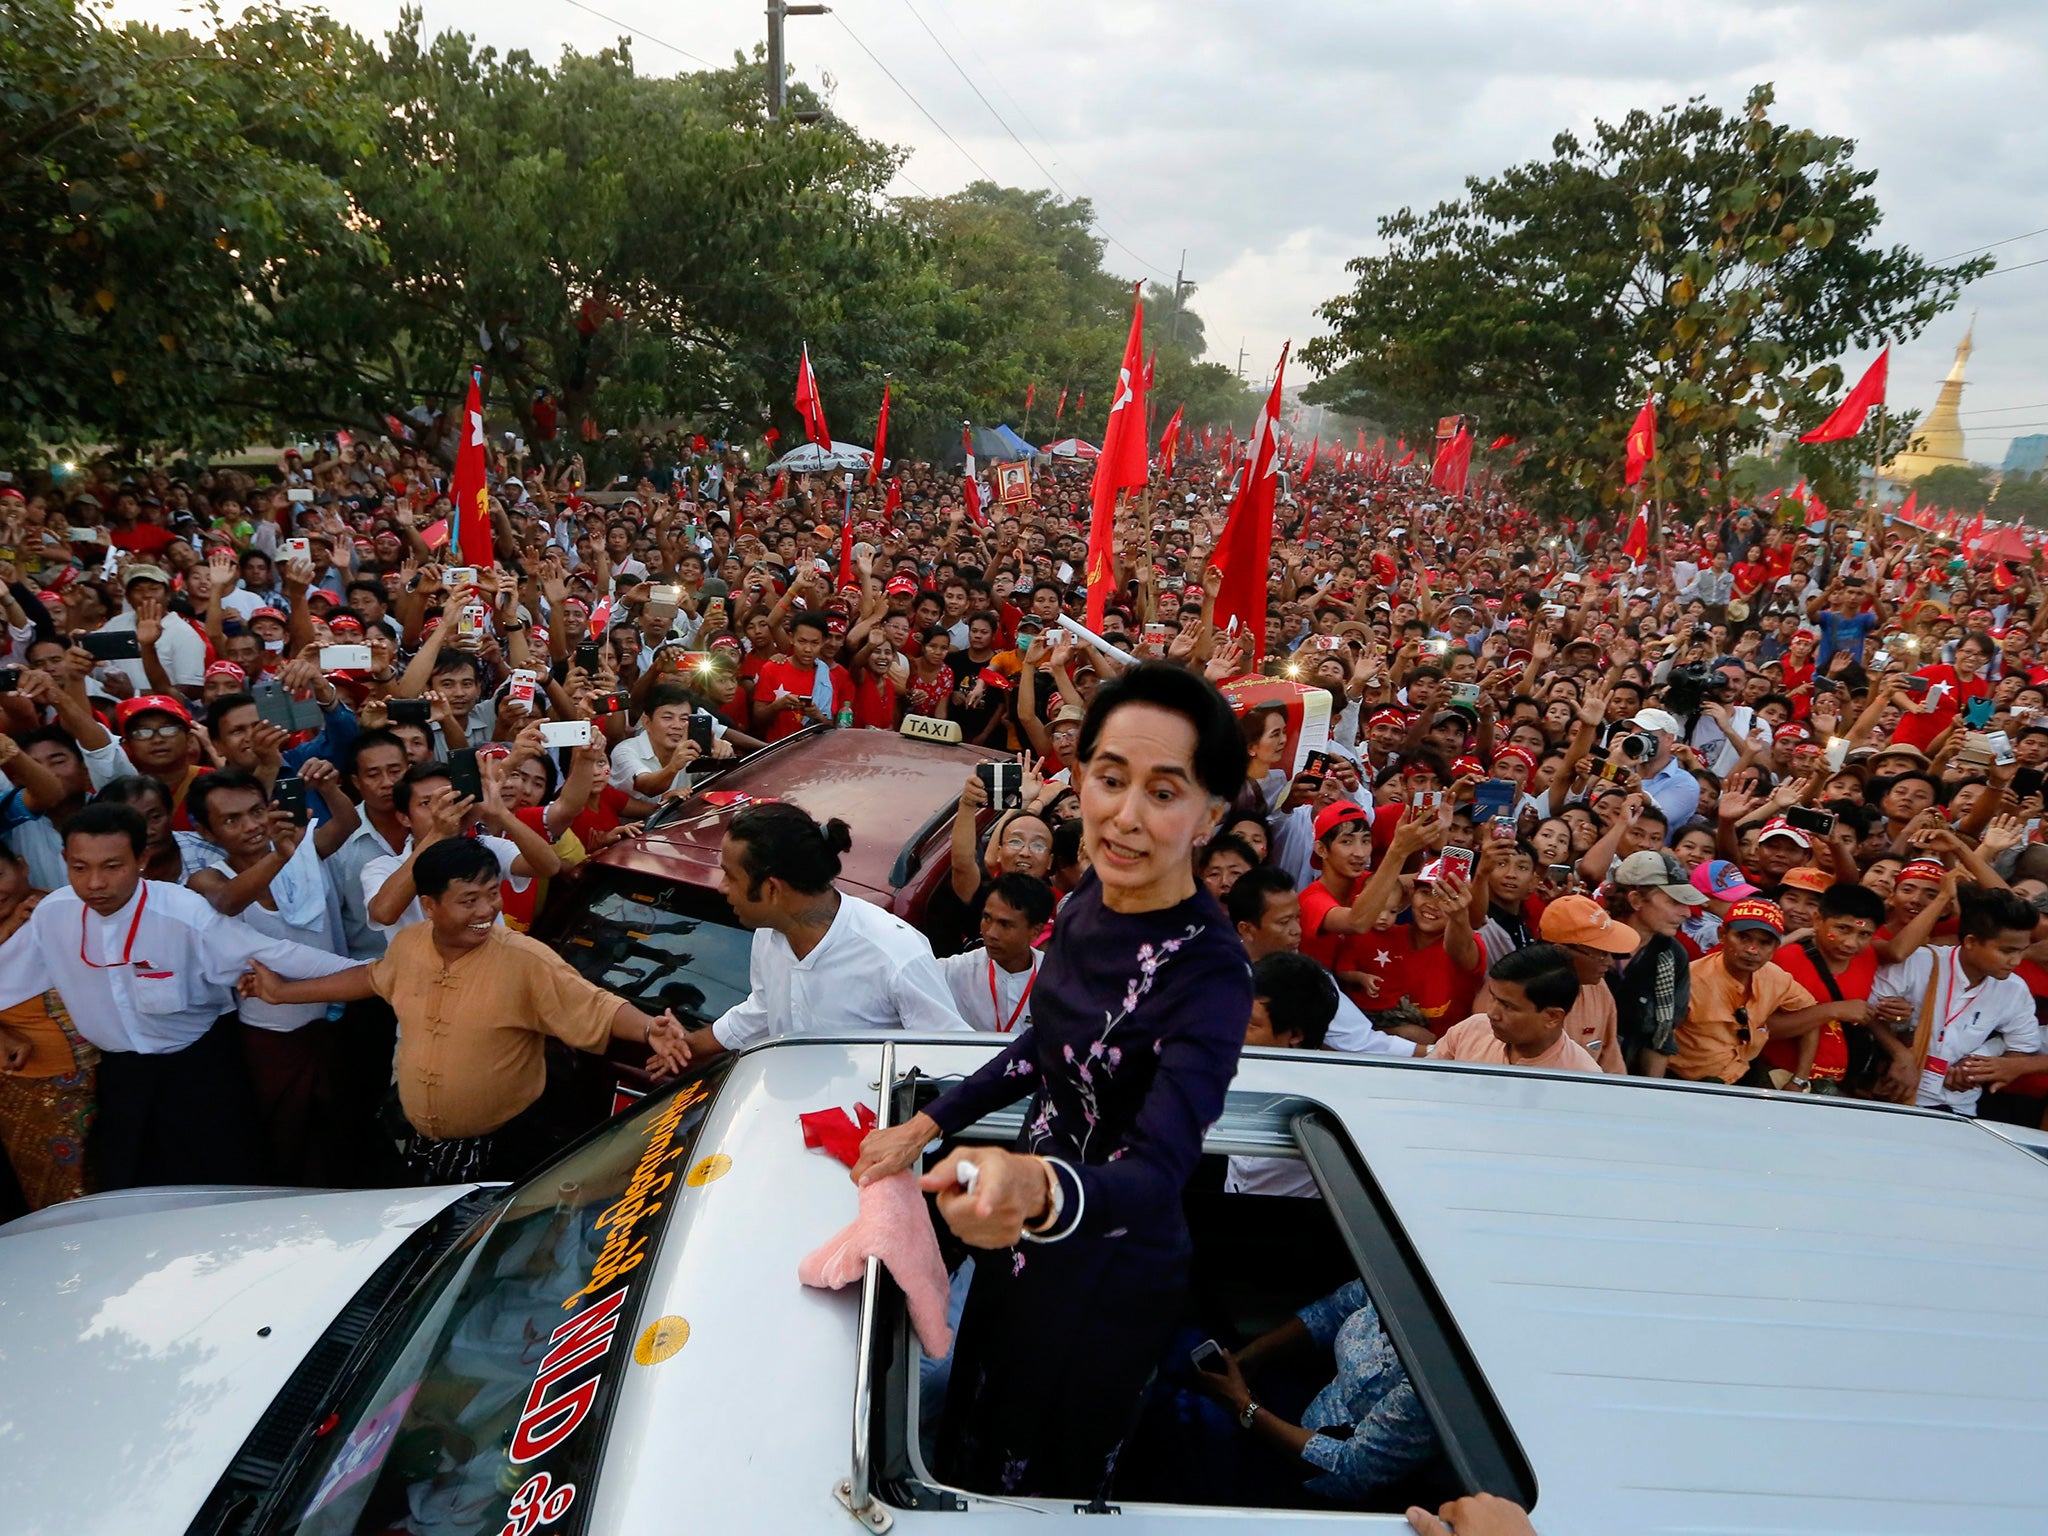 The opposition campaigner Aung San Suu Kyi, chairperson of National League for Democracy (NLD) party, is urging citizens to vote for change but avoid marginalising the losing party